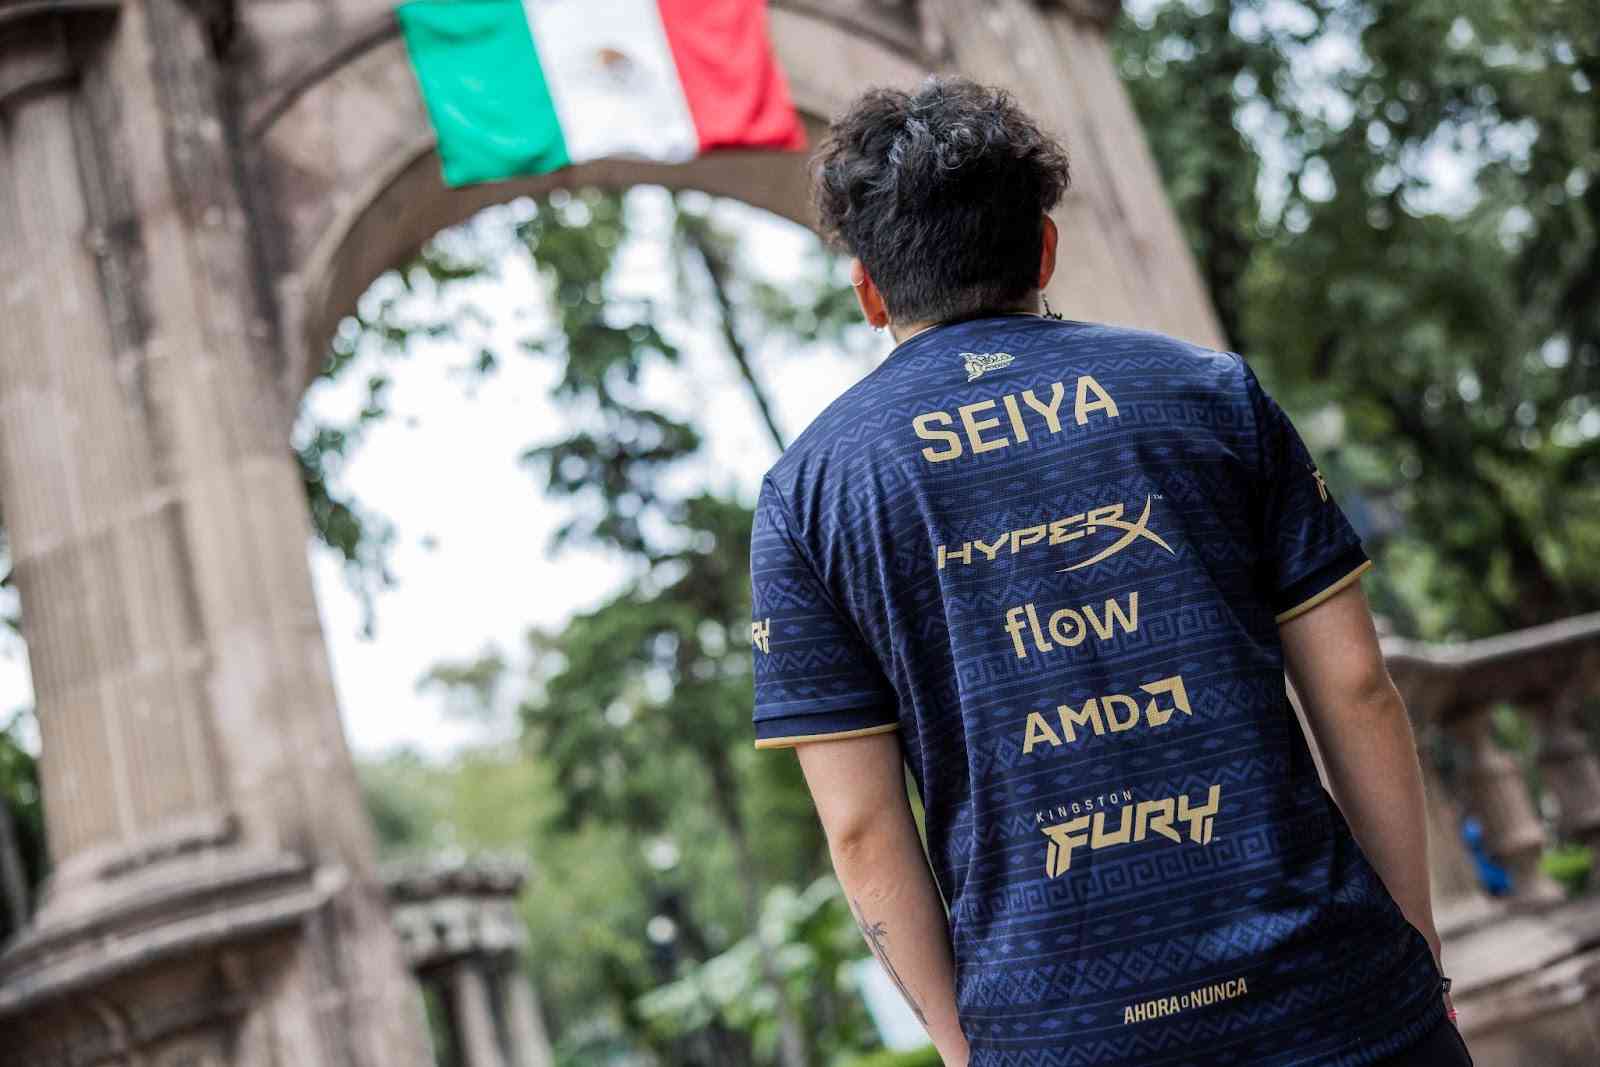 Isurus Gaming's Seiya is pictured from behind with his hands in his pockets wearing his team jersey with his tag and sponsors visible on the back.